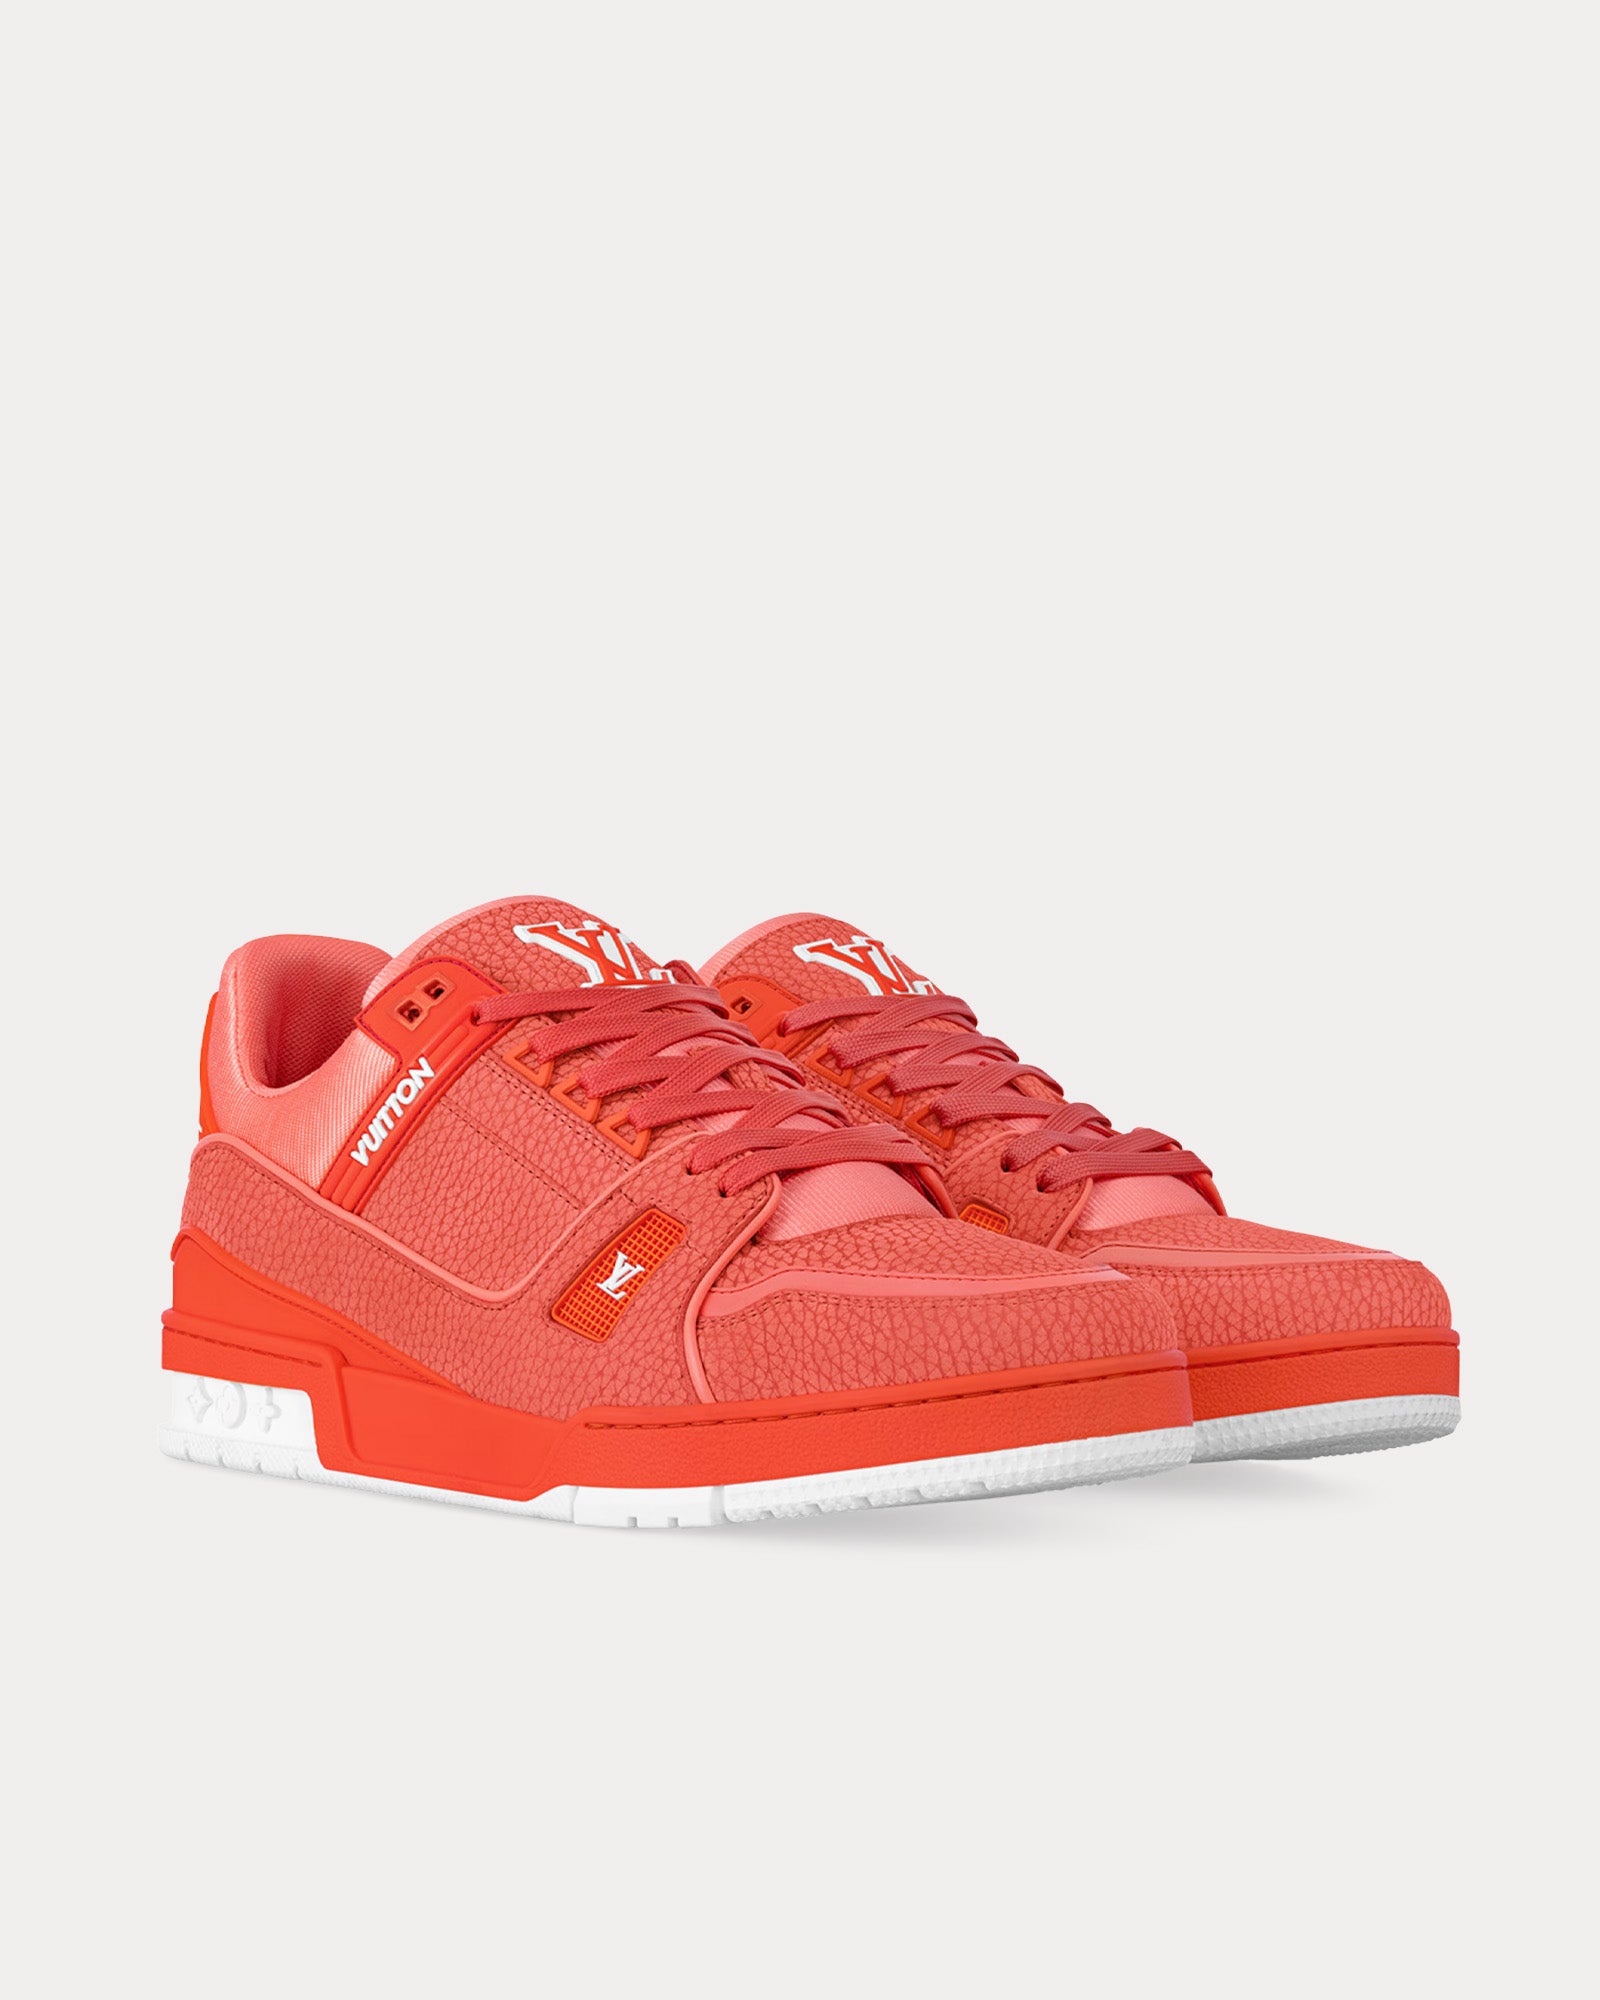 Louis Vuitton - LV Trainer Grained Calf Leather Pastel Orange Low Top Sneakers